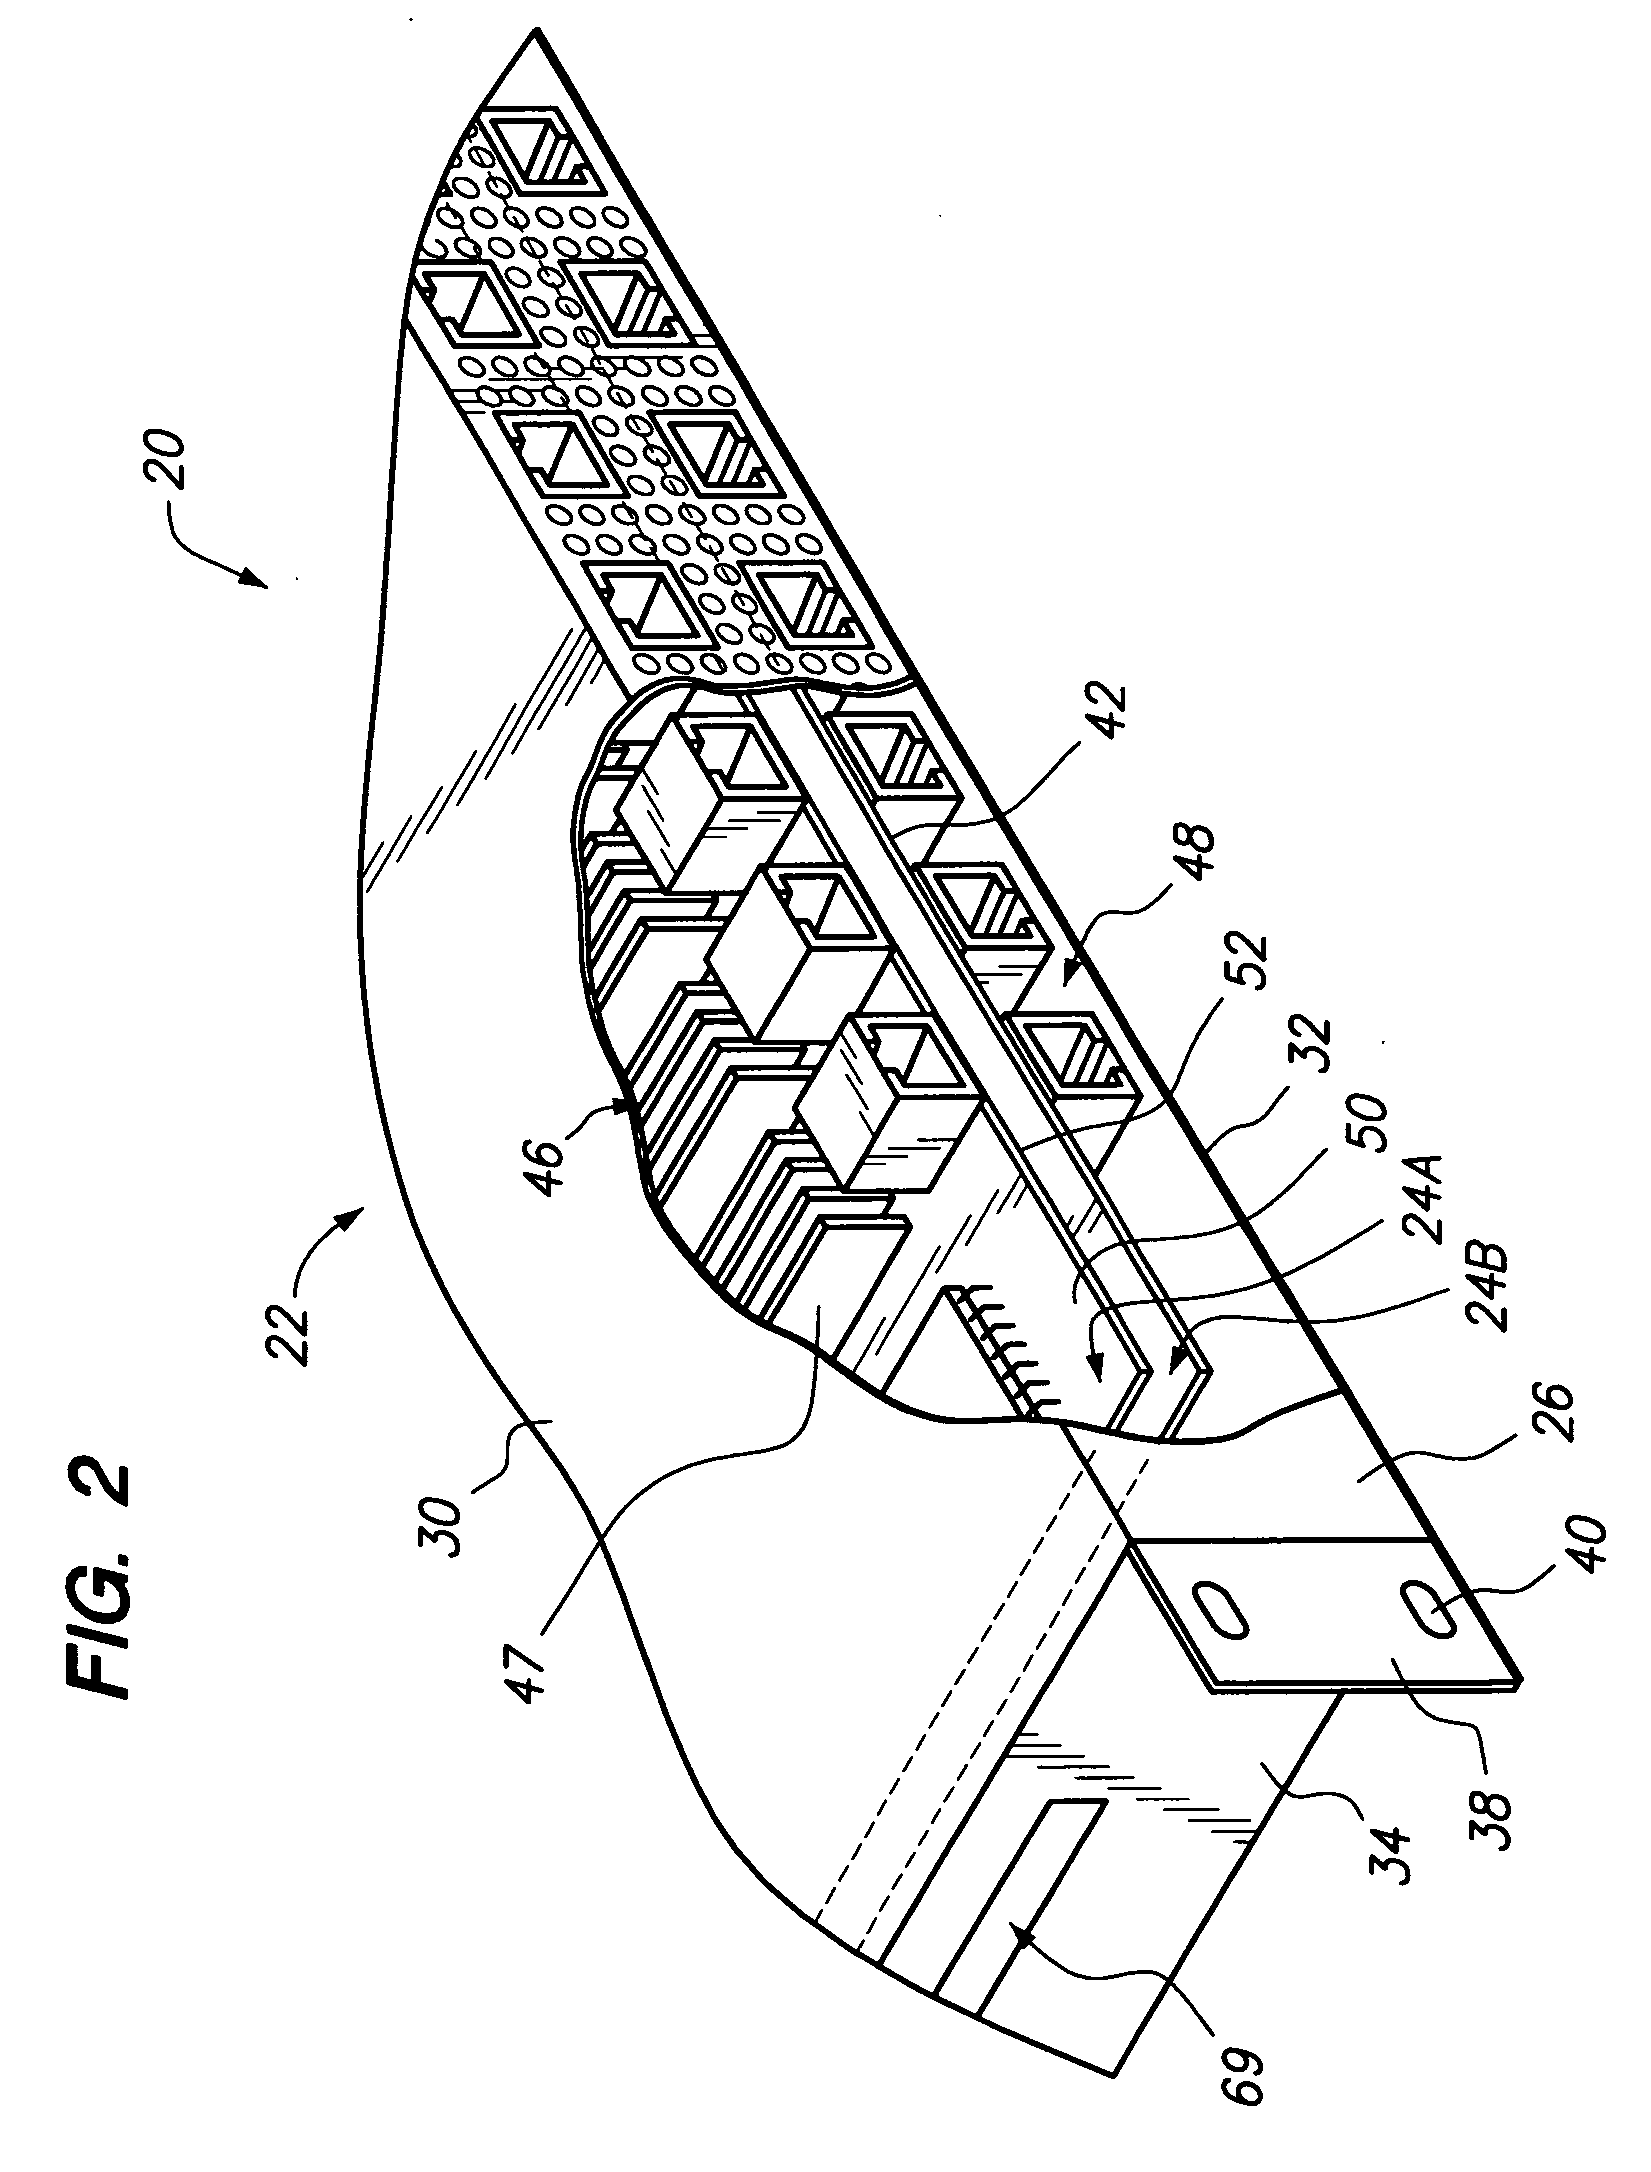 Cooling configuration for communication boards